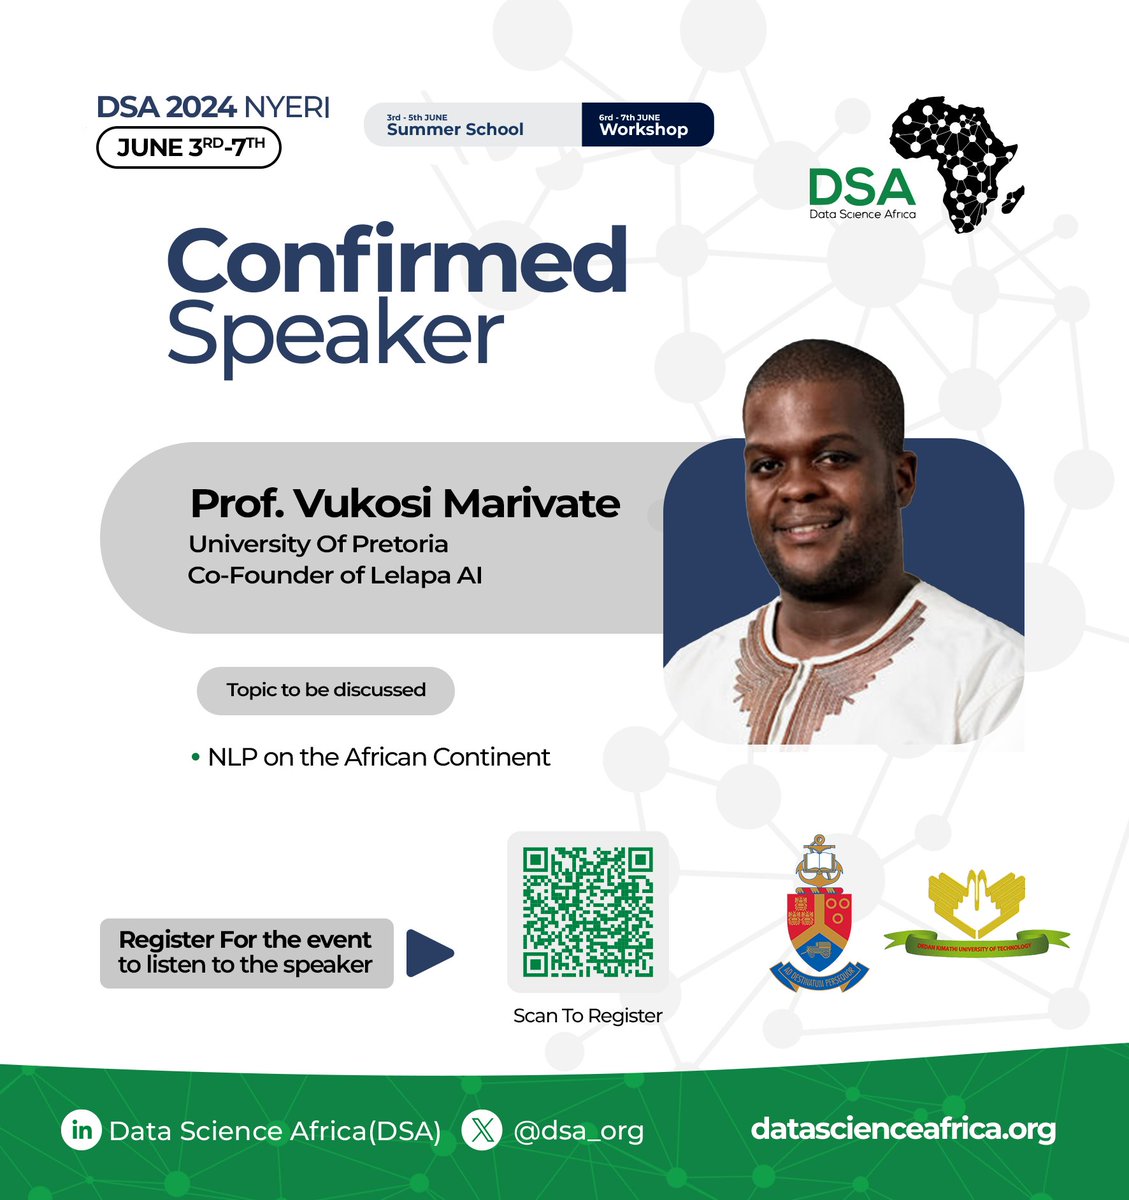 🚀 Exciting update! Delighted to reveal that Prof @vukosi is a keynote speaker at #DSA2024Nyeri! He's an esteemed Associate Professor in Computer Science, currently the ABSA UP Chair of Data Science at the University of Pretoria. 👉bit.ly/4cbhqmq 🙌 #DataScienceAfrica